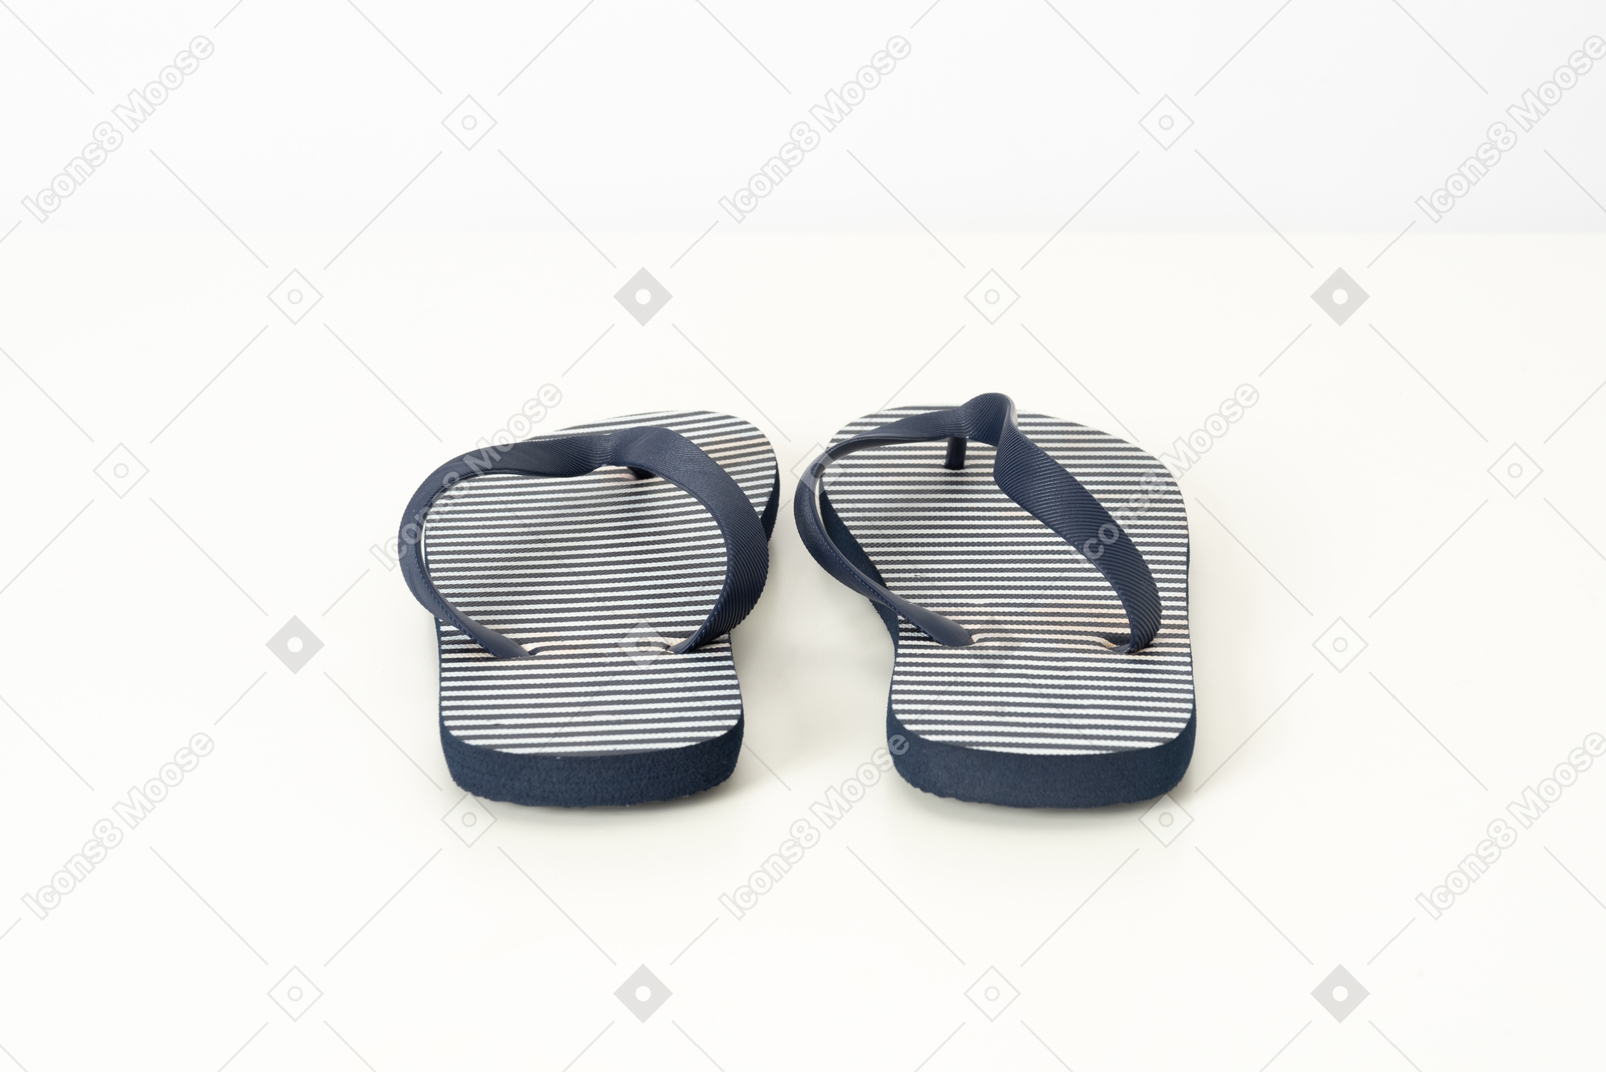 Blue and white flip-flops on a white background